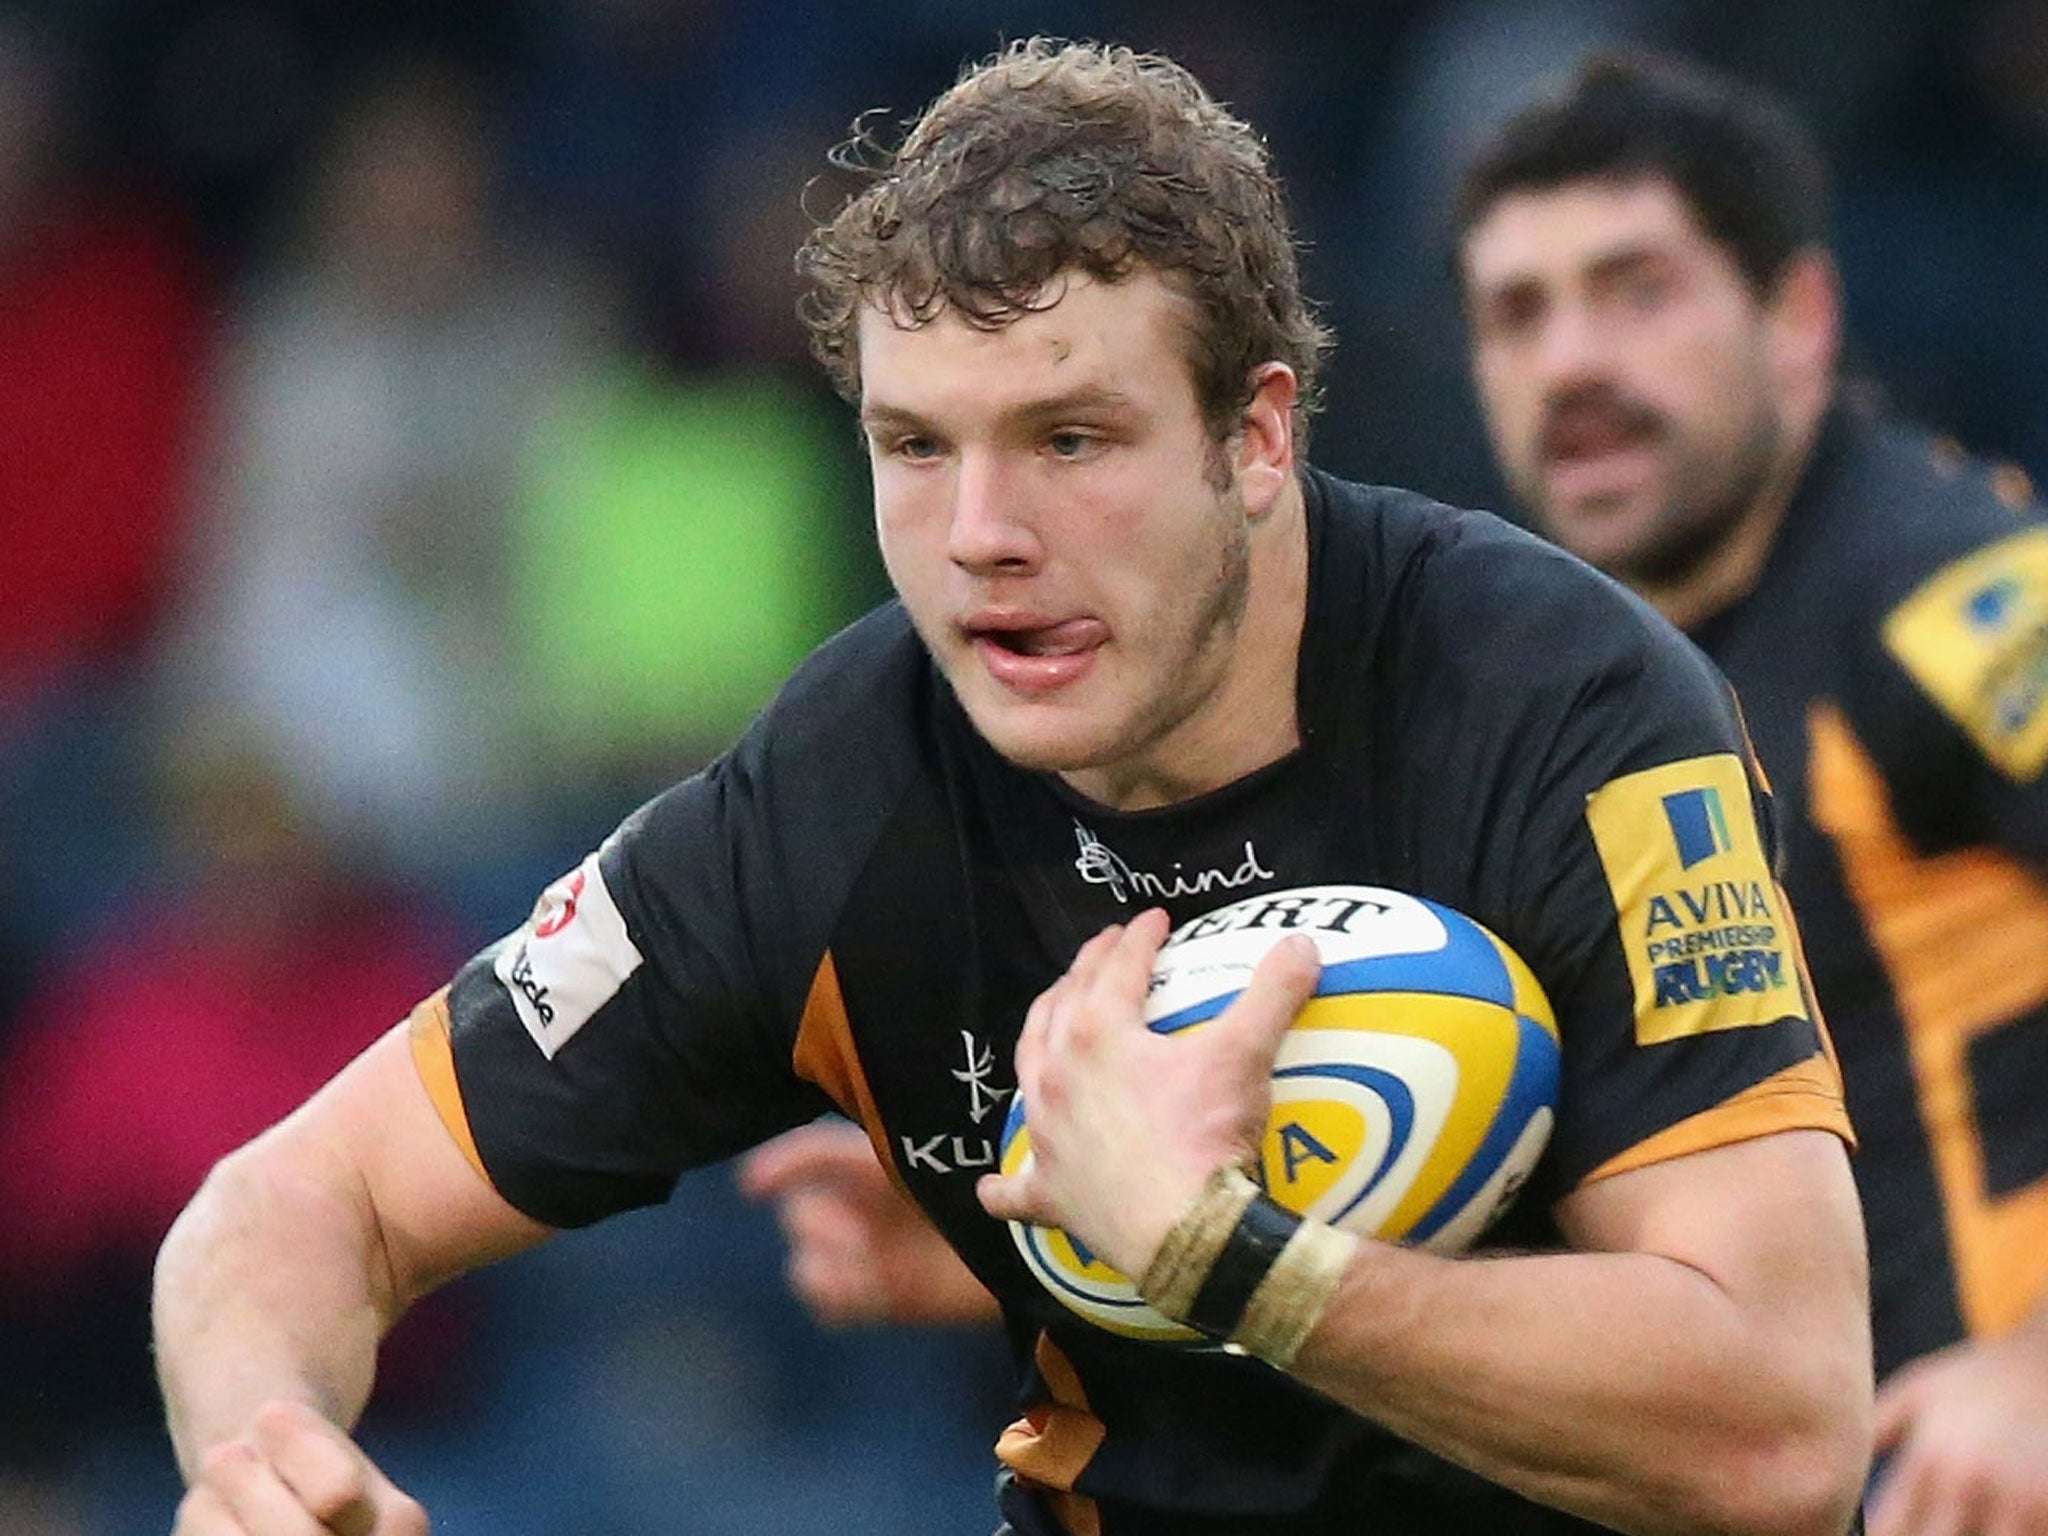 Joe Launchbury of Wasps aims to impress against Leinster